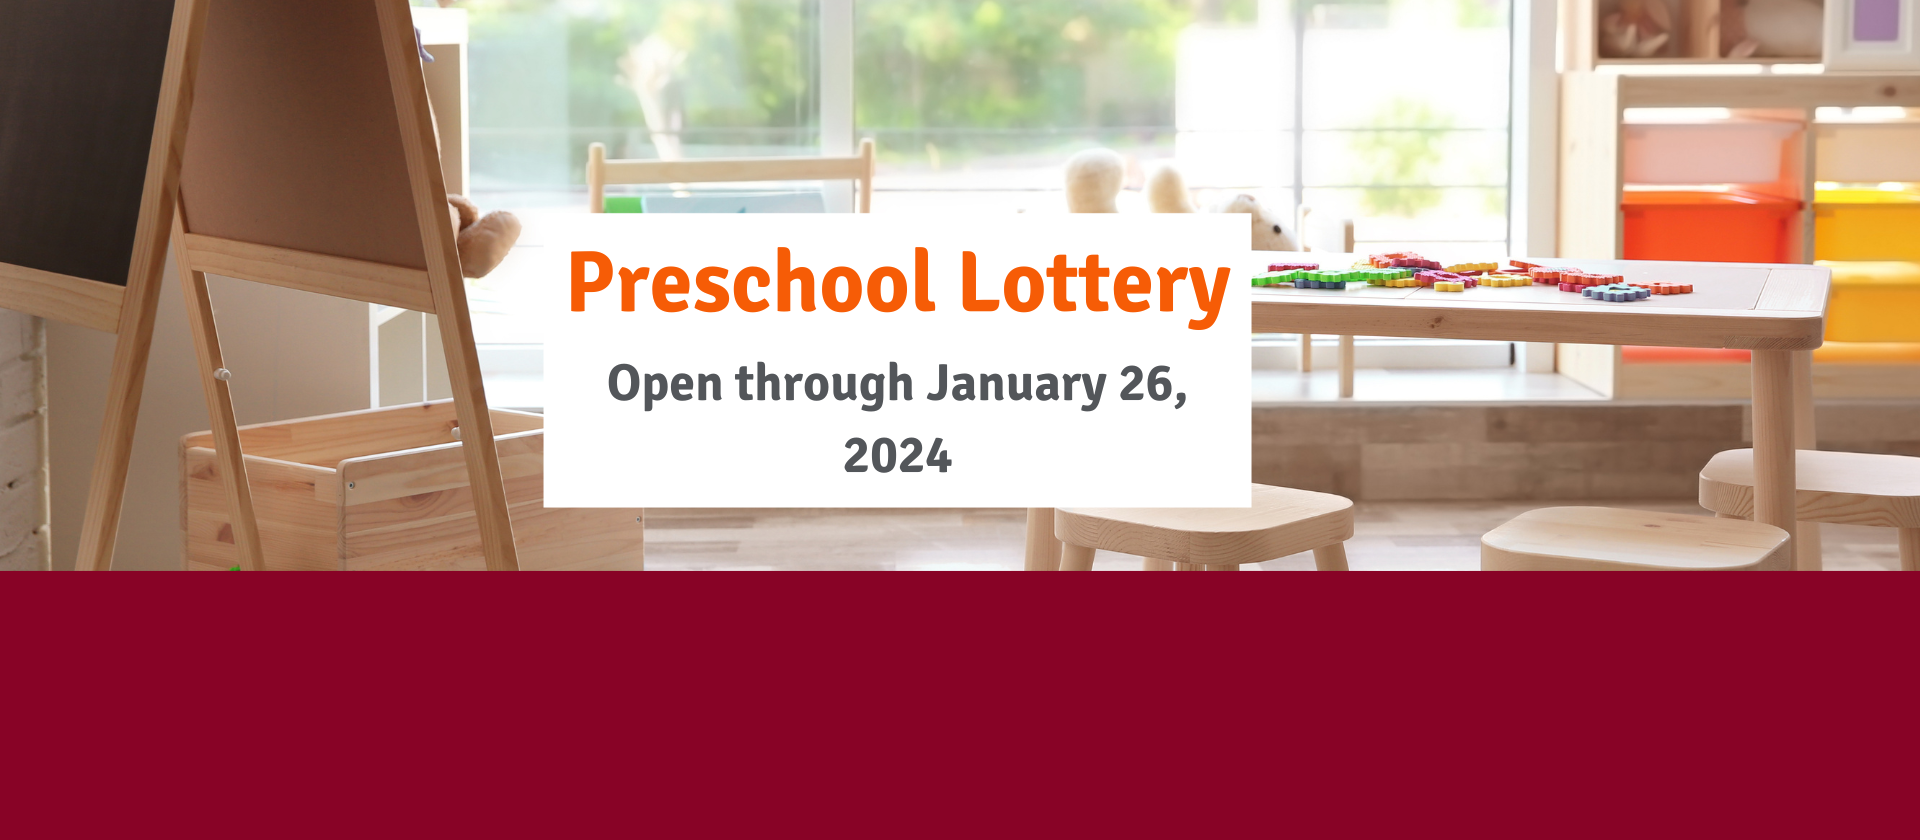 <h2>The Preschool Lottery is NOW OPEN!</h2>
<p>Enter your student for a chance to participate in this program in the 2024-25 School Year.<br />
&nbsp;<br />
<a href="https://ec.bps101.net/preschool-program/" class="button ">Details Here</a></p>
